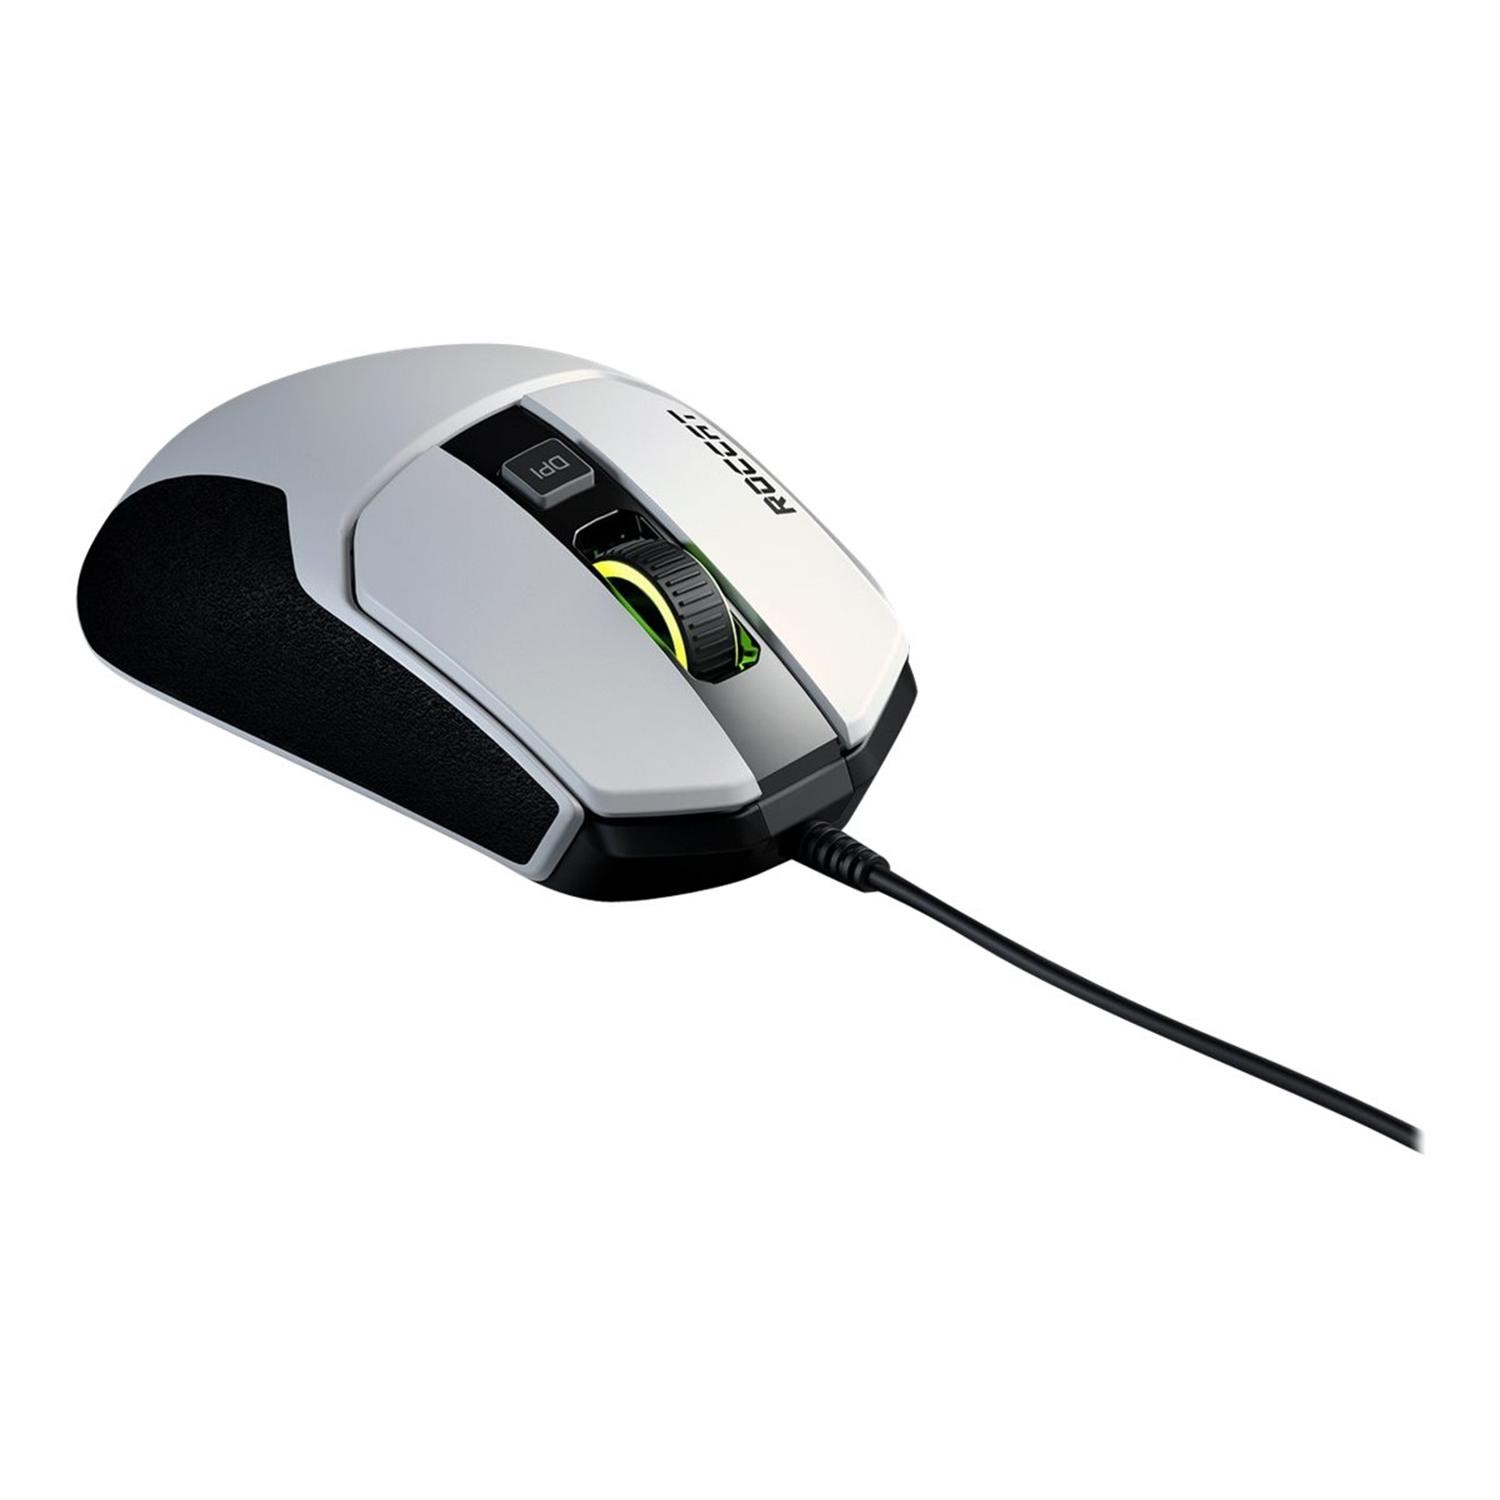 Roccat Kain 102 Aimo 8500dpi Titan Click Technology Wired Gaming Mouse Laptops Direct